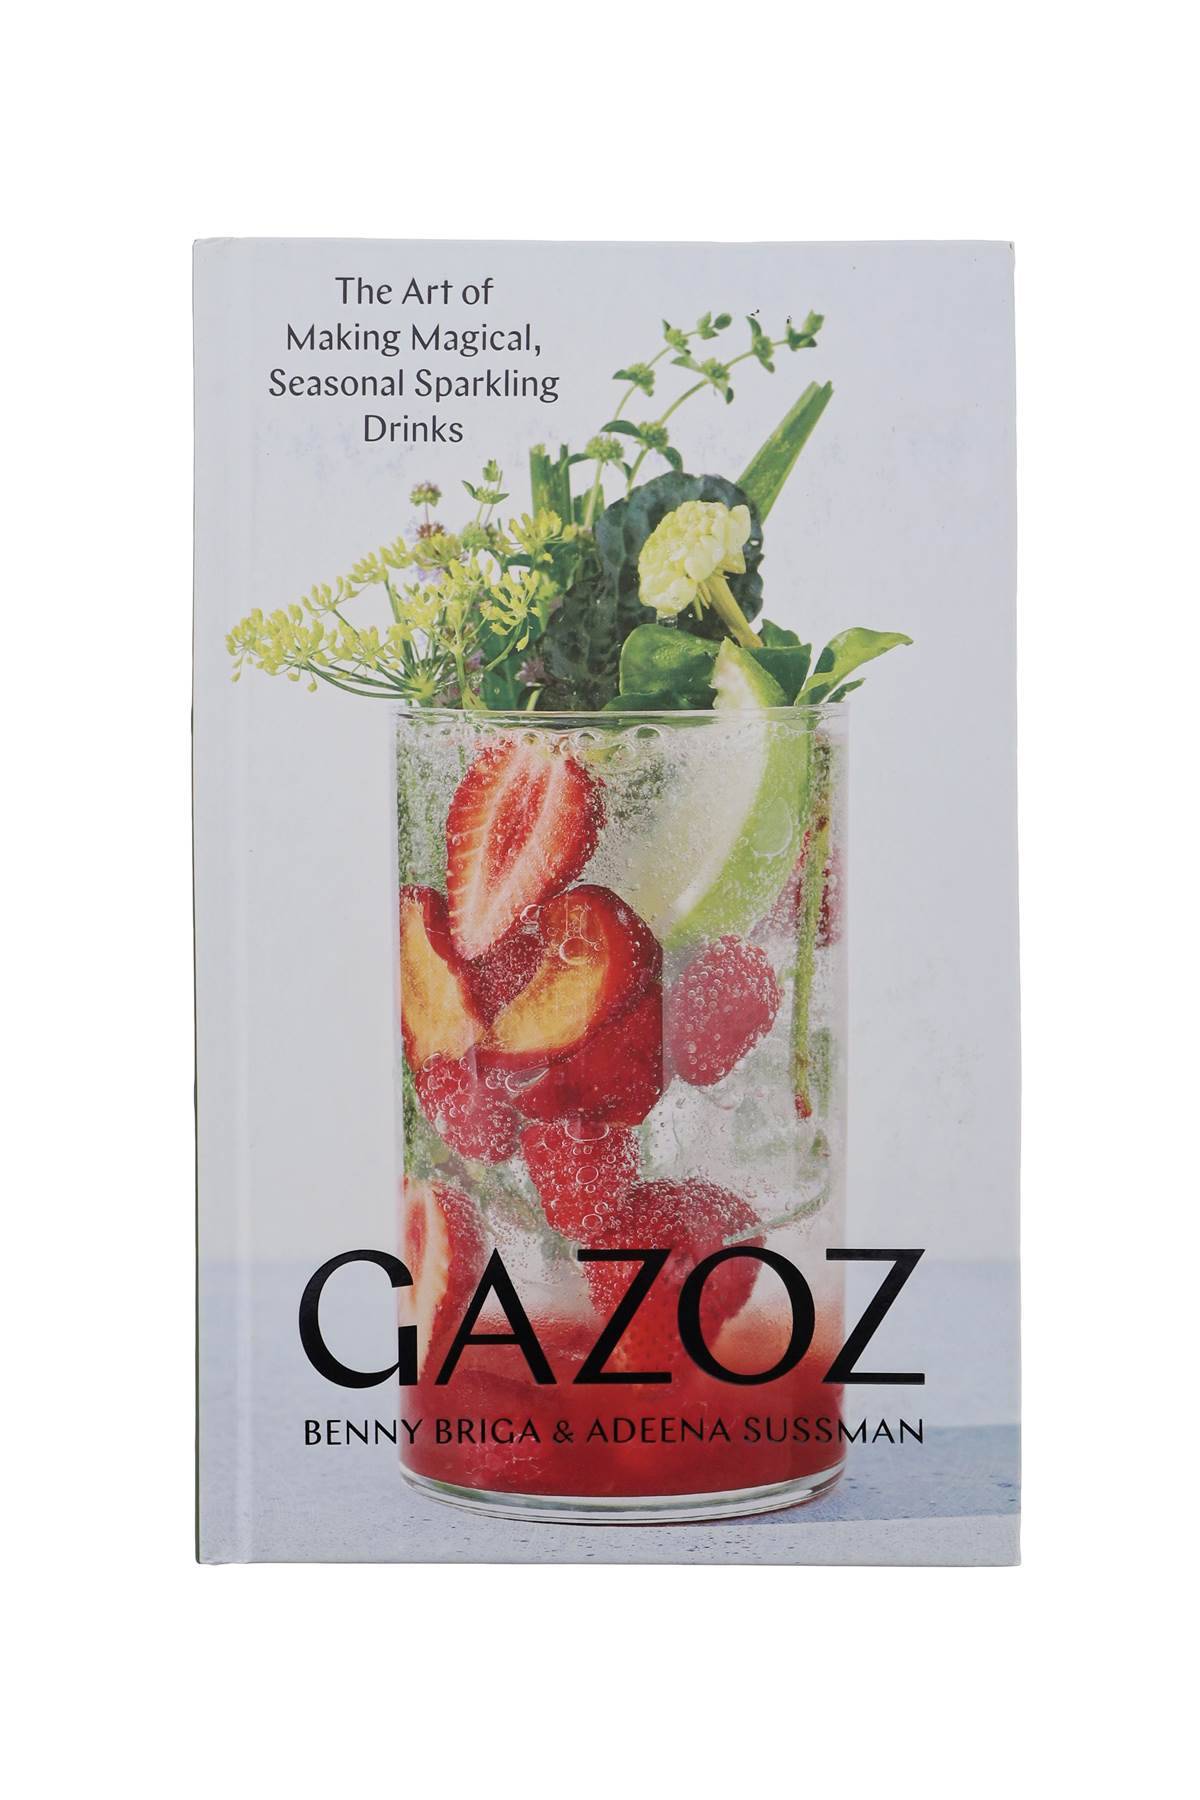 NEW MAGS NEW MAGS gazoz - the art of making magical, seasonal sparkling drinks